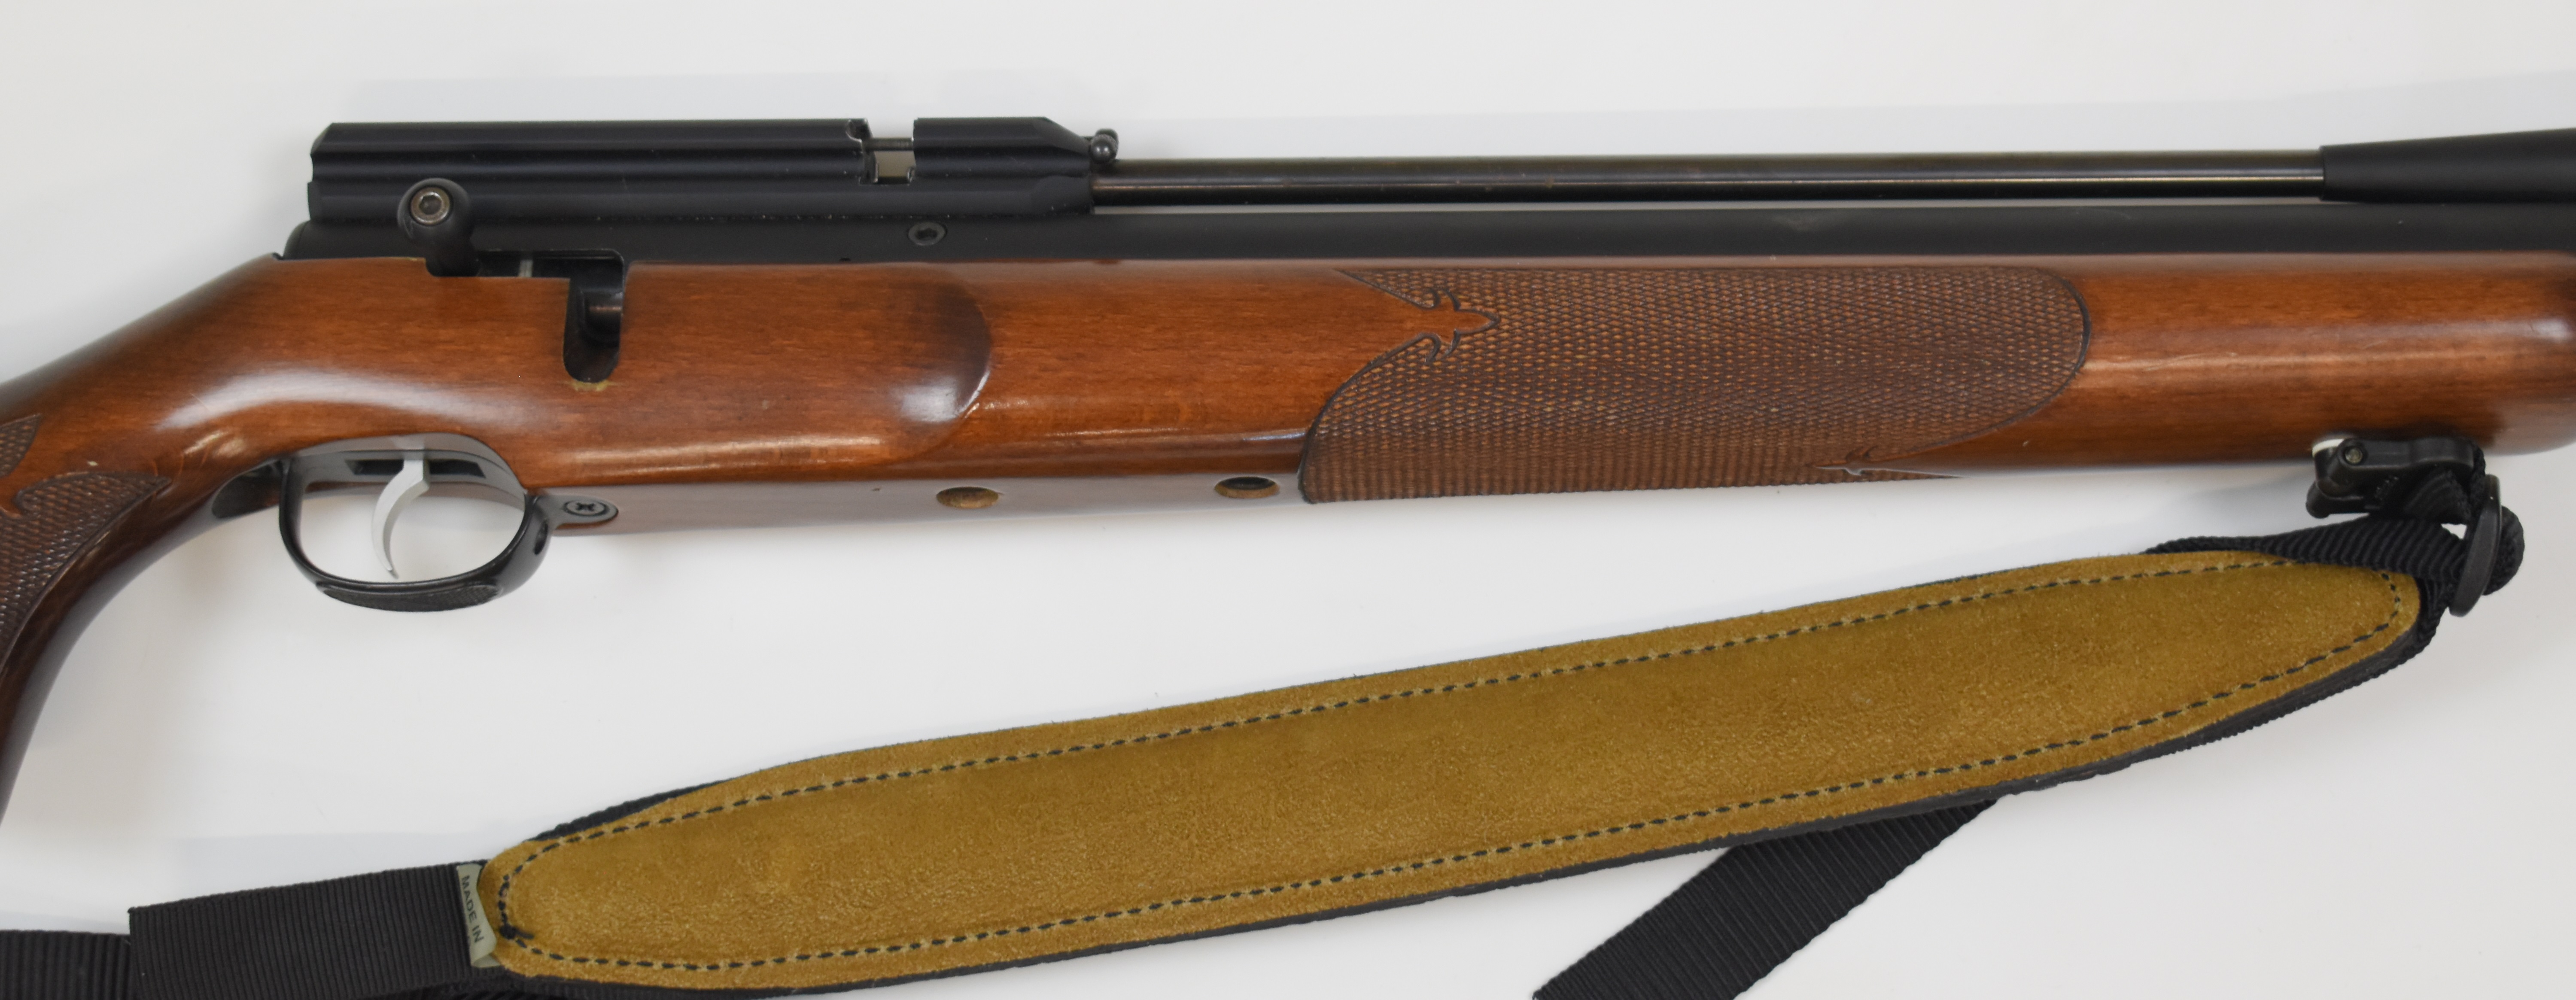 Webley Axsor .22 PCP air rifle with chequered semi-pistol grip and forend, raised cheek piece, - Image 4 of 20